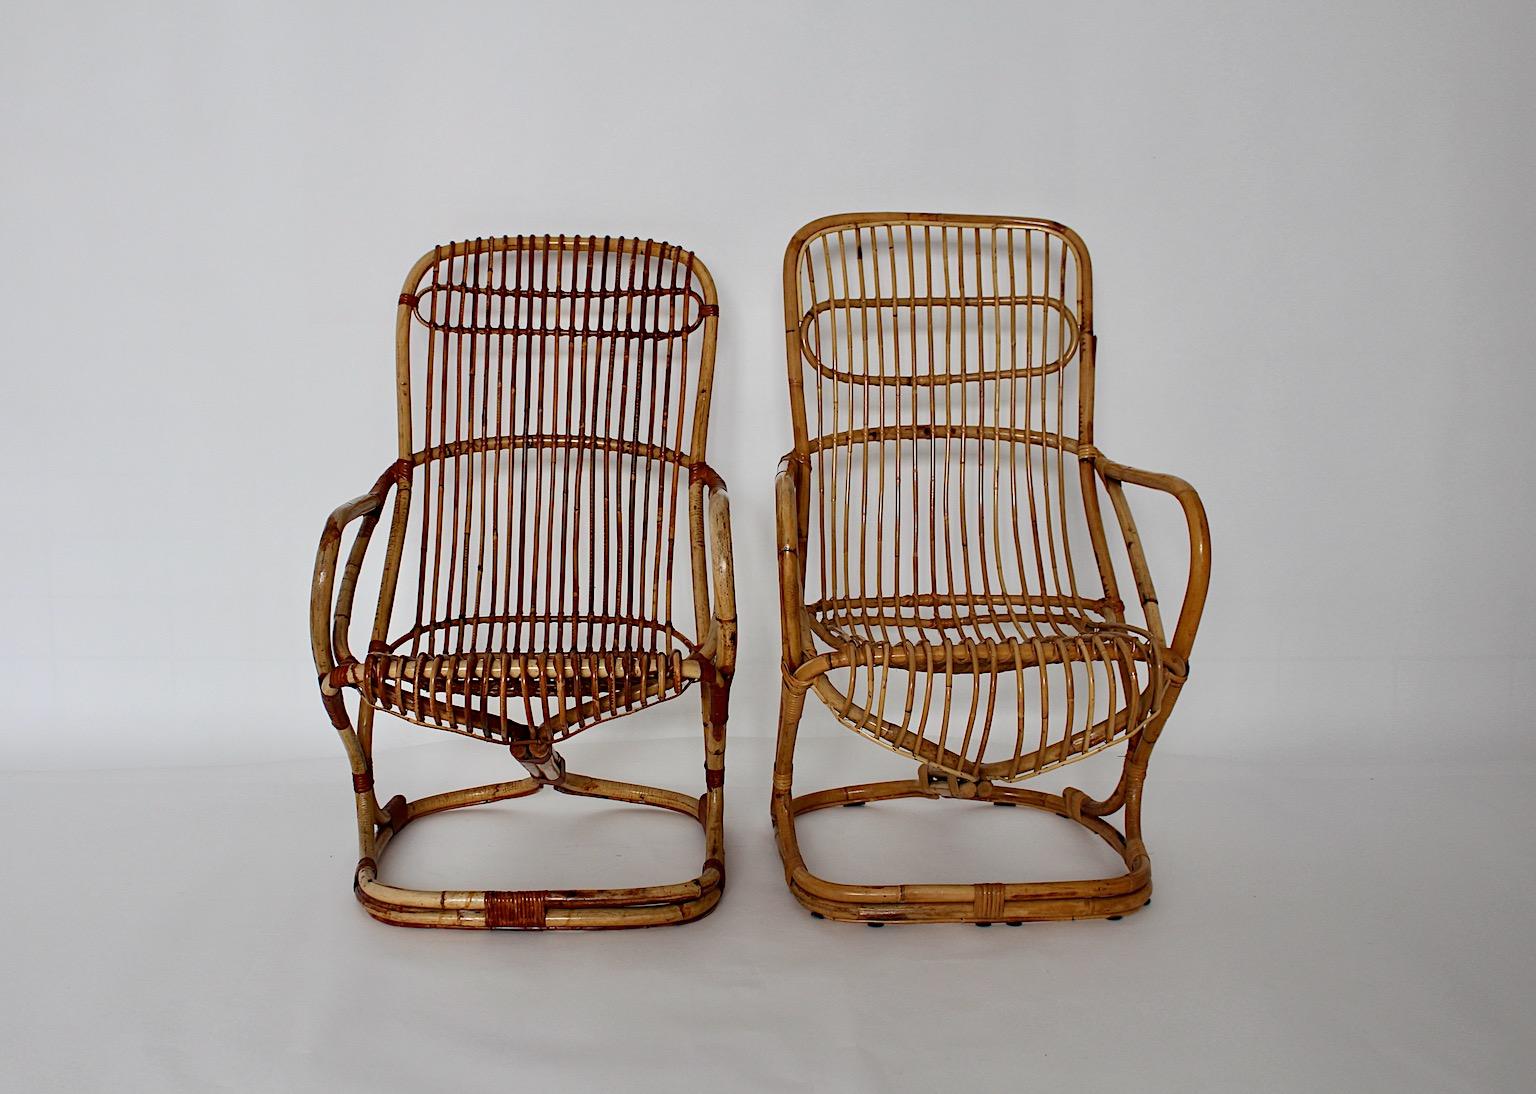 Mid-Century Modern Riviera style vintage bent bamboo rattan set of two garden patio armchairs or Lounge chairs designed, 1960s, Italy.

The set of rattan armchairs works very well throughout its beautiful shape and its natural vibes.
Very